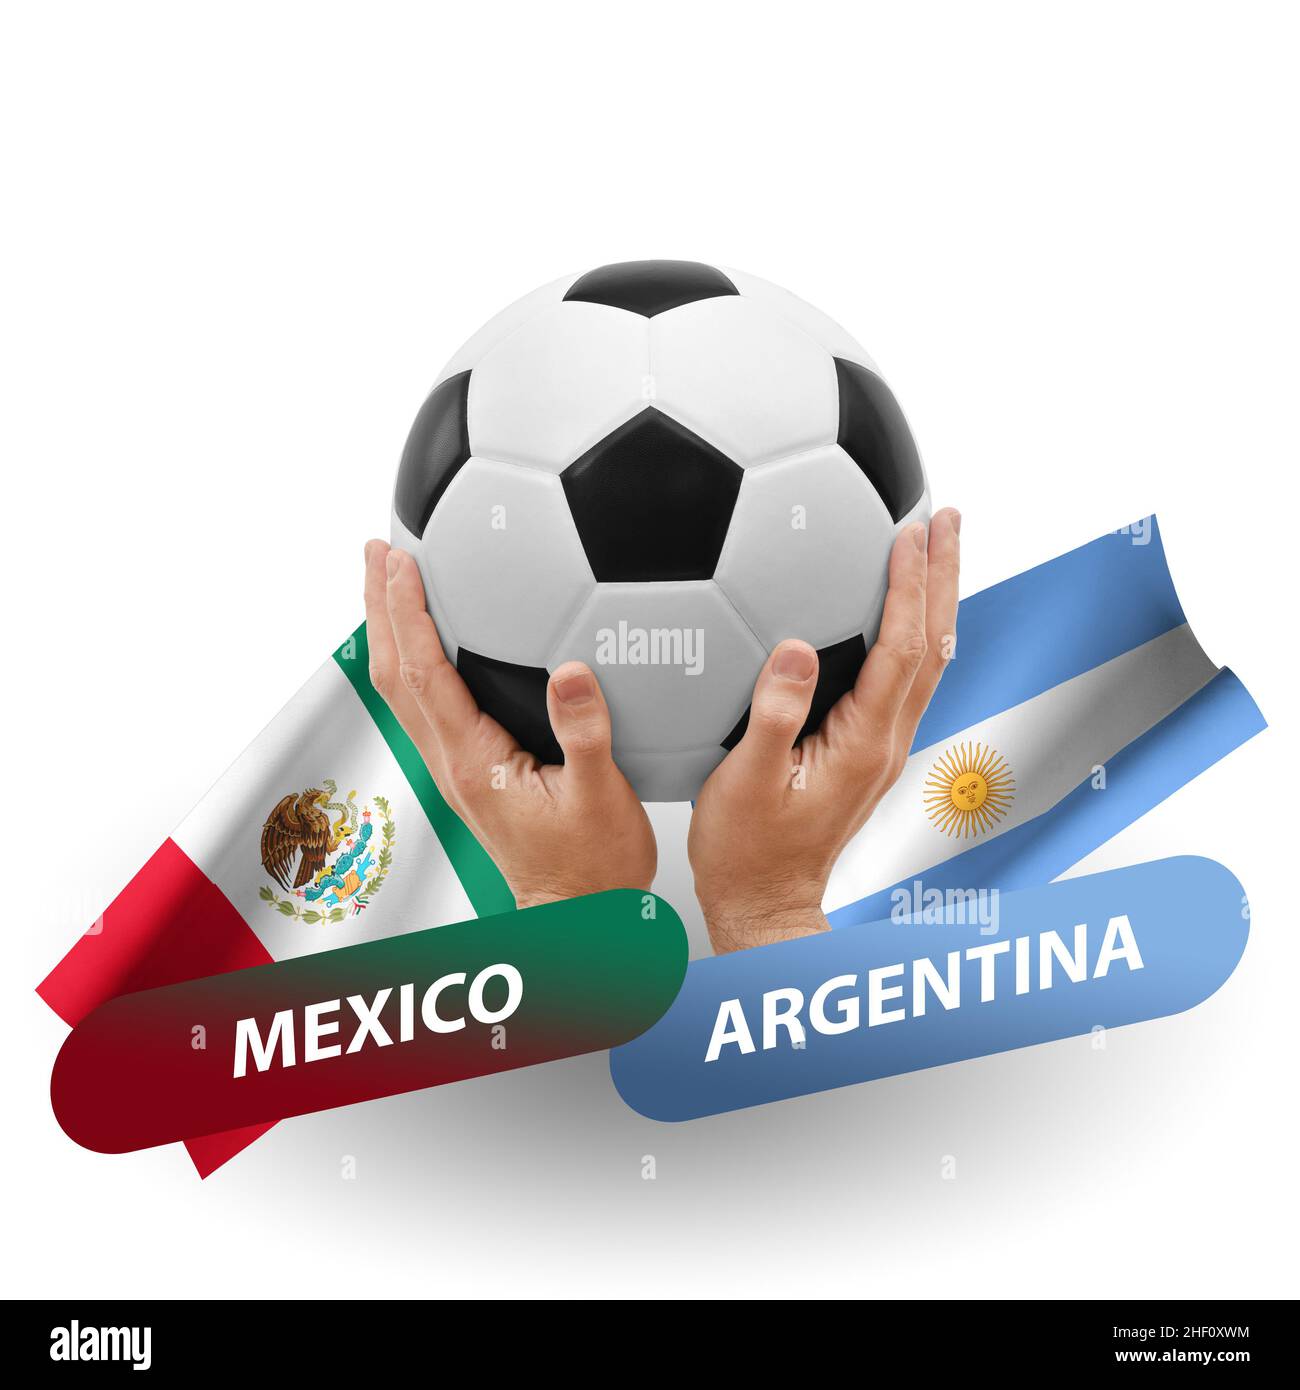 All 100+ Images mexico national football team vs argentina national football team Stunning